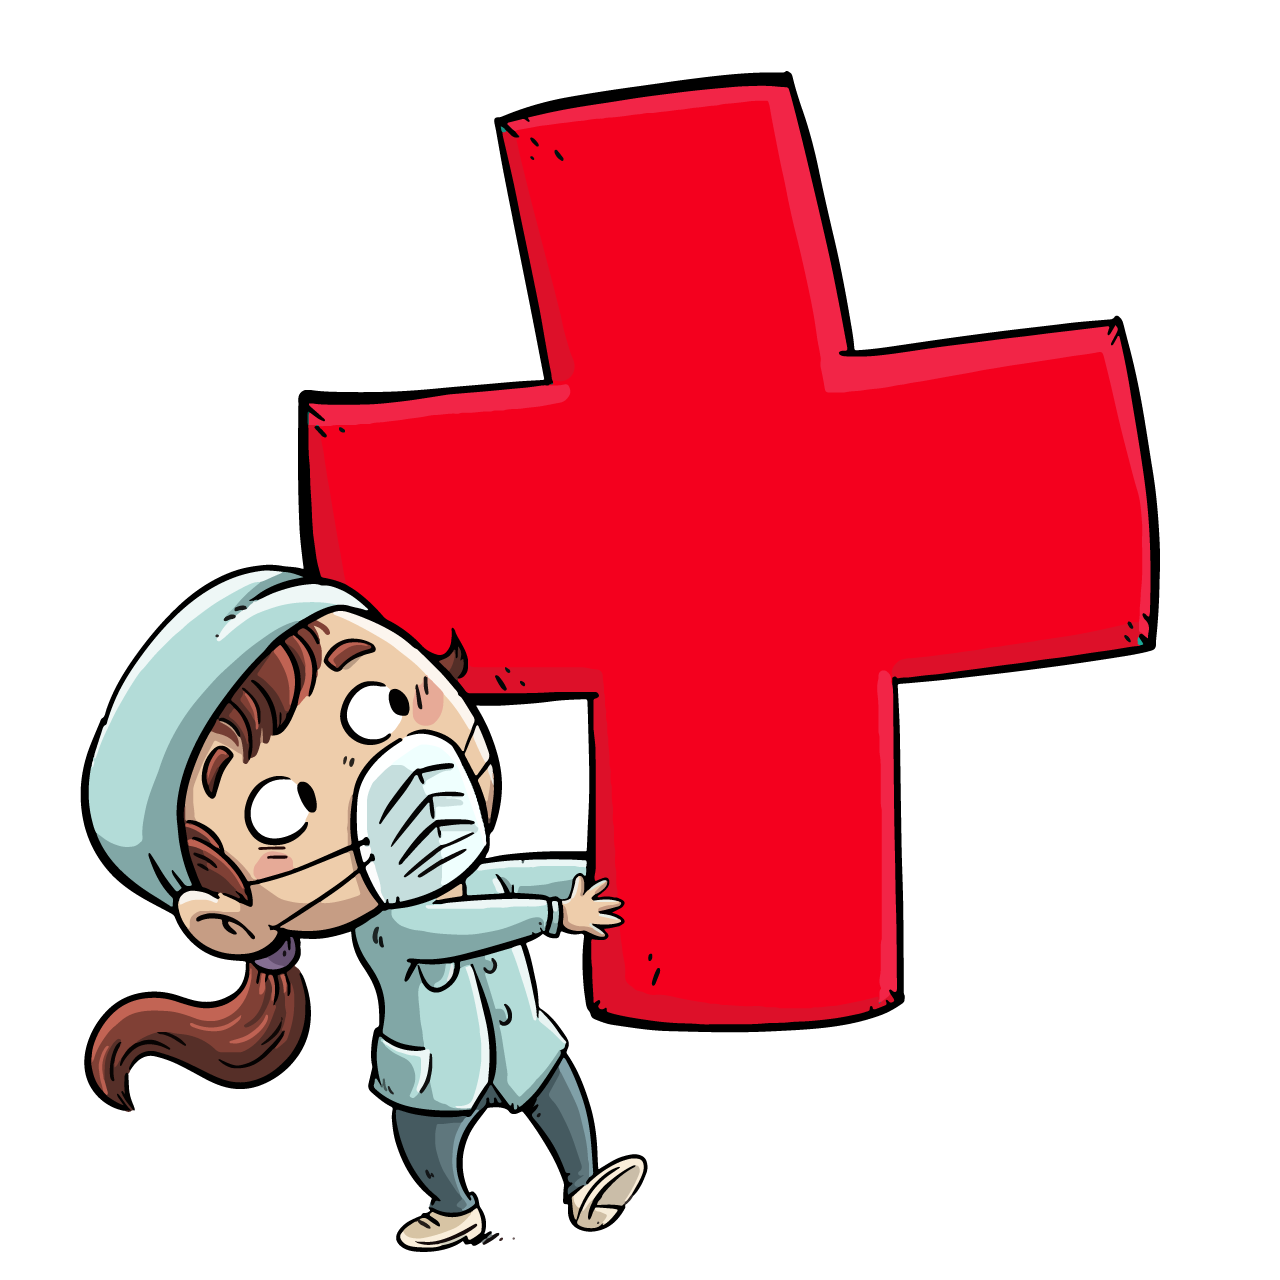 Nurse girl with giant green cross cartoon illustration image transparent background png